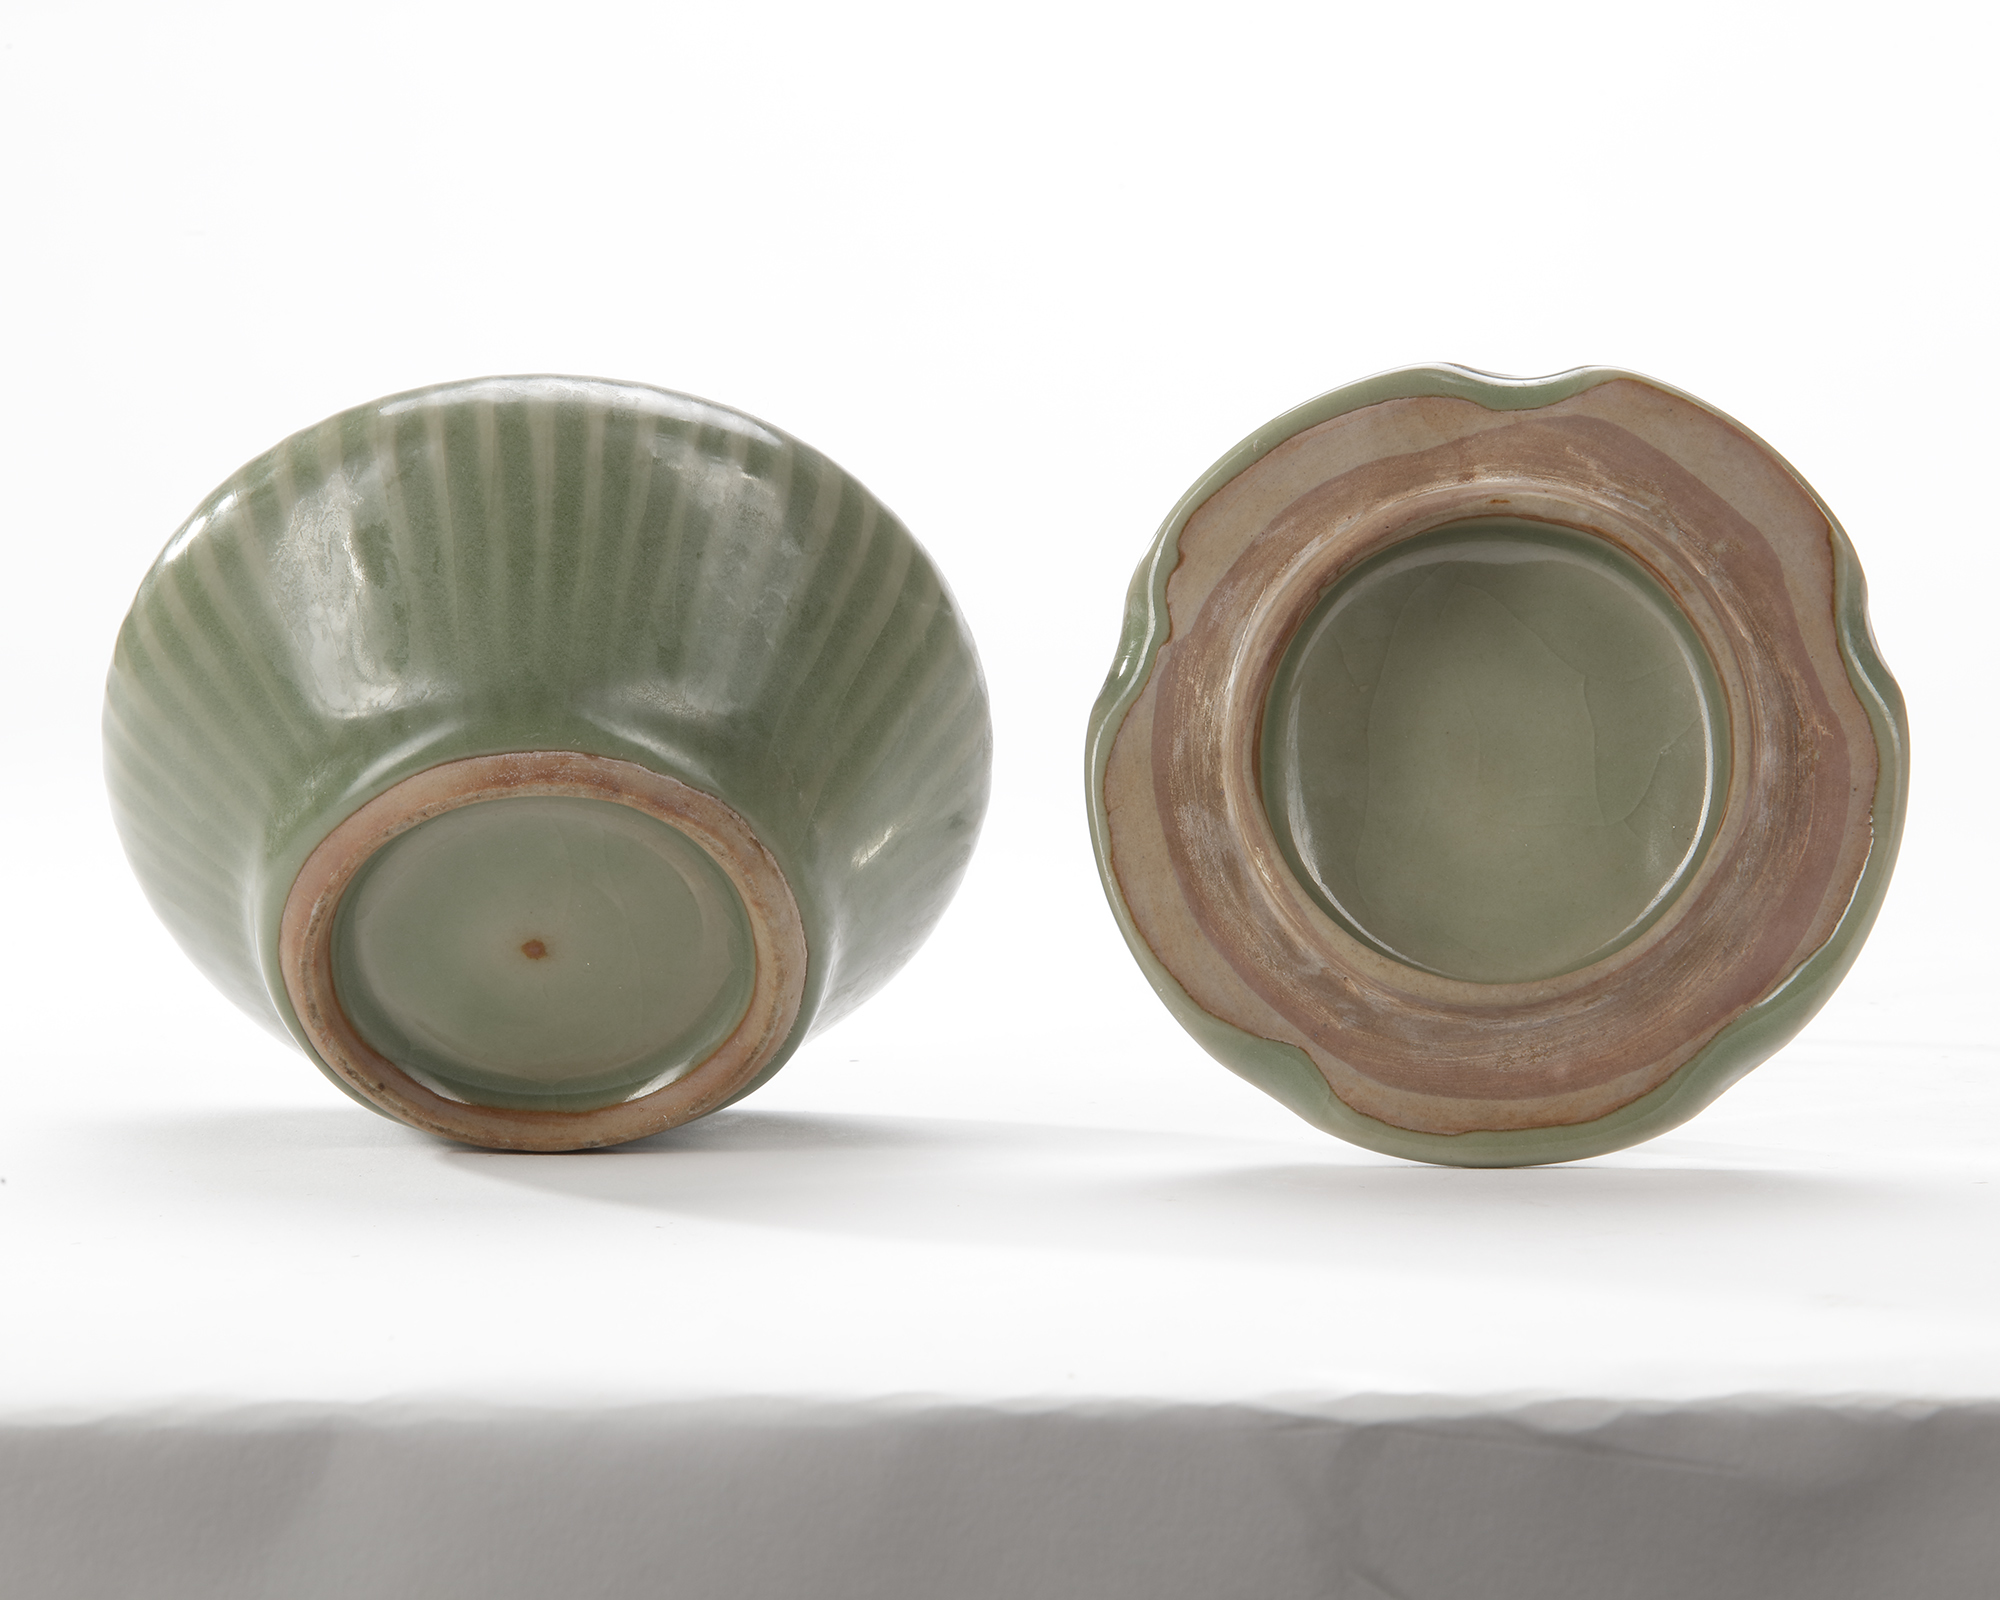 A CHINESE LONGQUAN CELADON CRACKLED ‘HUNDRED RIB’ JAR AND ‘LOTUS’ COVER, MING DYNASTY (1368-1644) - Image 4 of 4